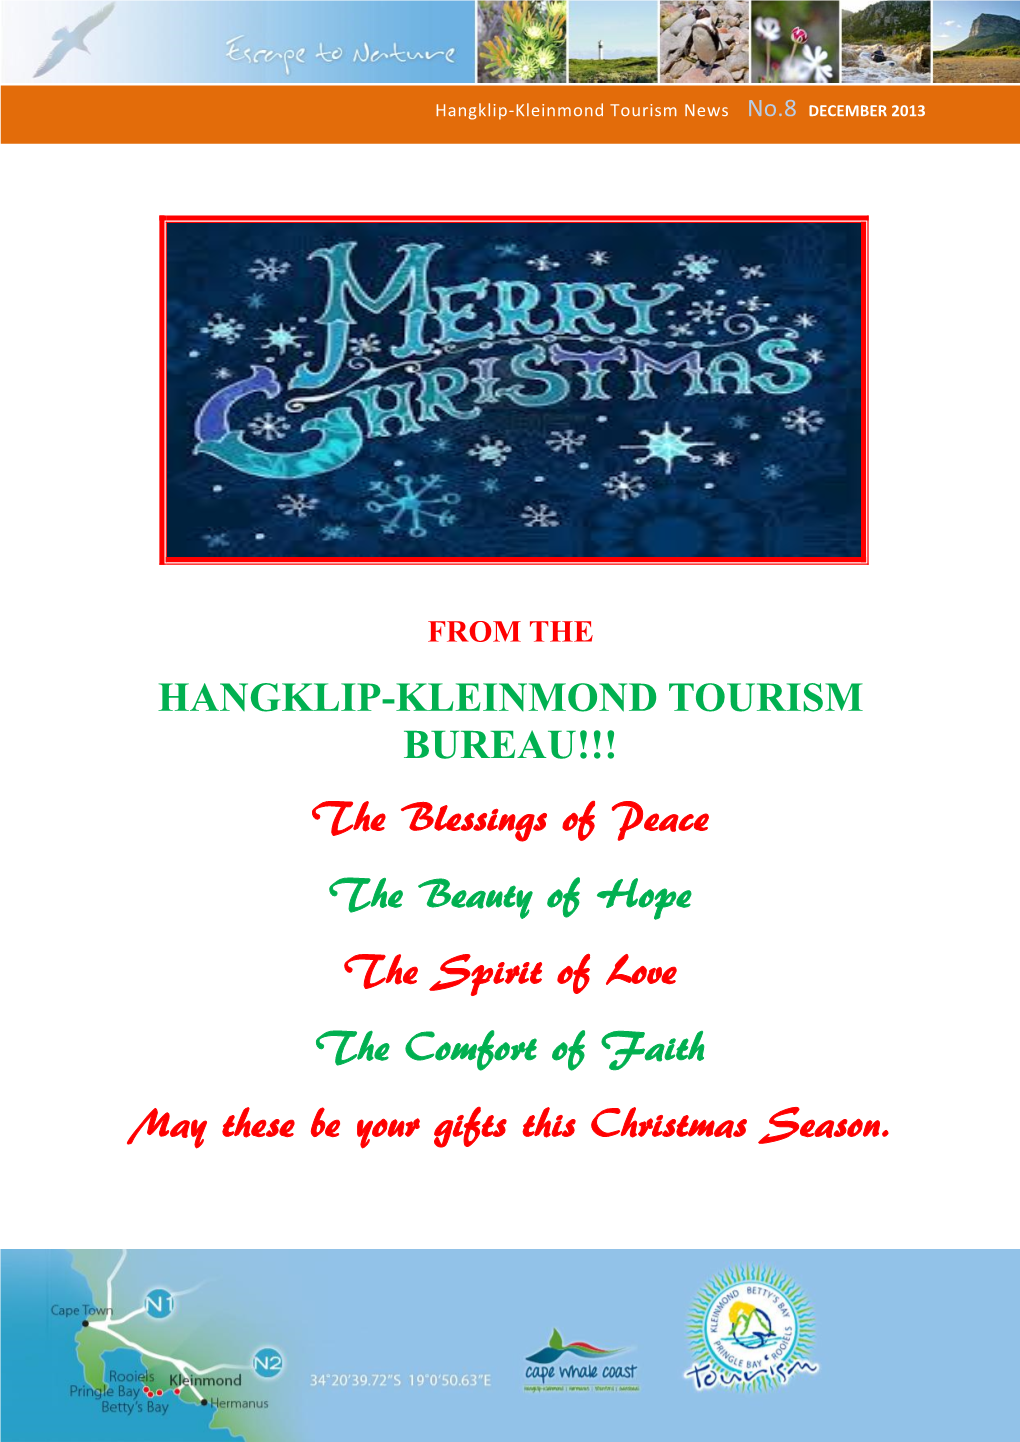 HANGKLIP-KLEINMOND TOURISM BUREAU!!! the Blessings of Peace the Beauty of Hope the Spirit of Love the Comfort of Faith May These Be Your Gifts This Christmas Season